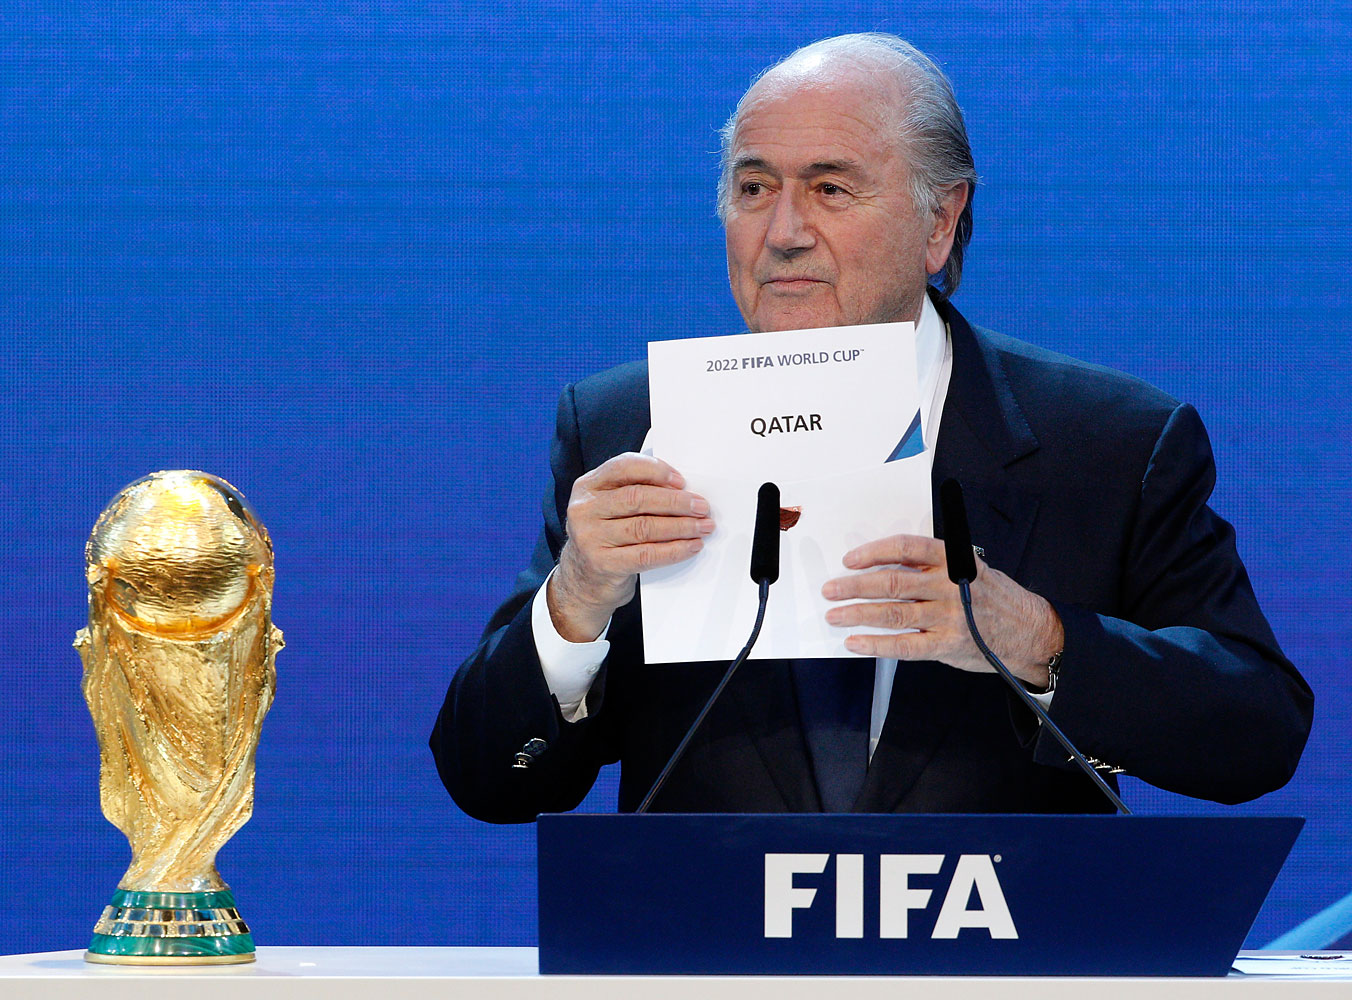 FIFA President Sepp Blatter announces Qatar as the host nation for the FIFA World Cup 2022, in Zurich, Dec. 2, 2010. A bribery scandal may cost the Middle Eastern nation the tournament. (Christian Hartmann—Reuters)